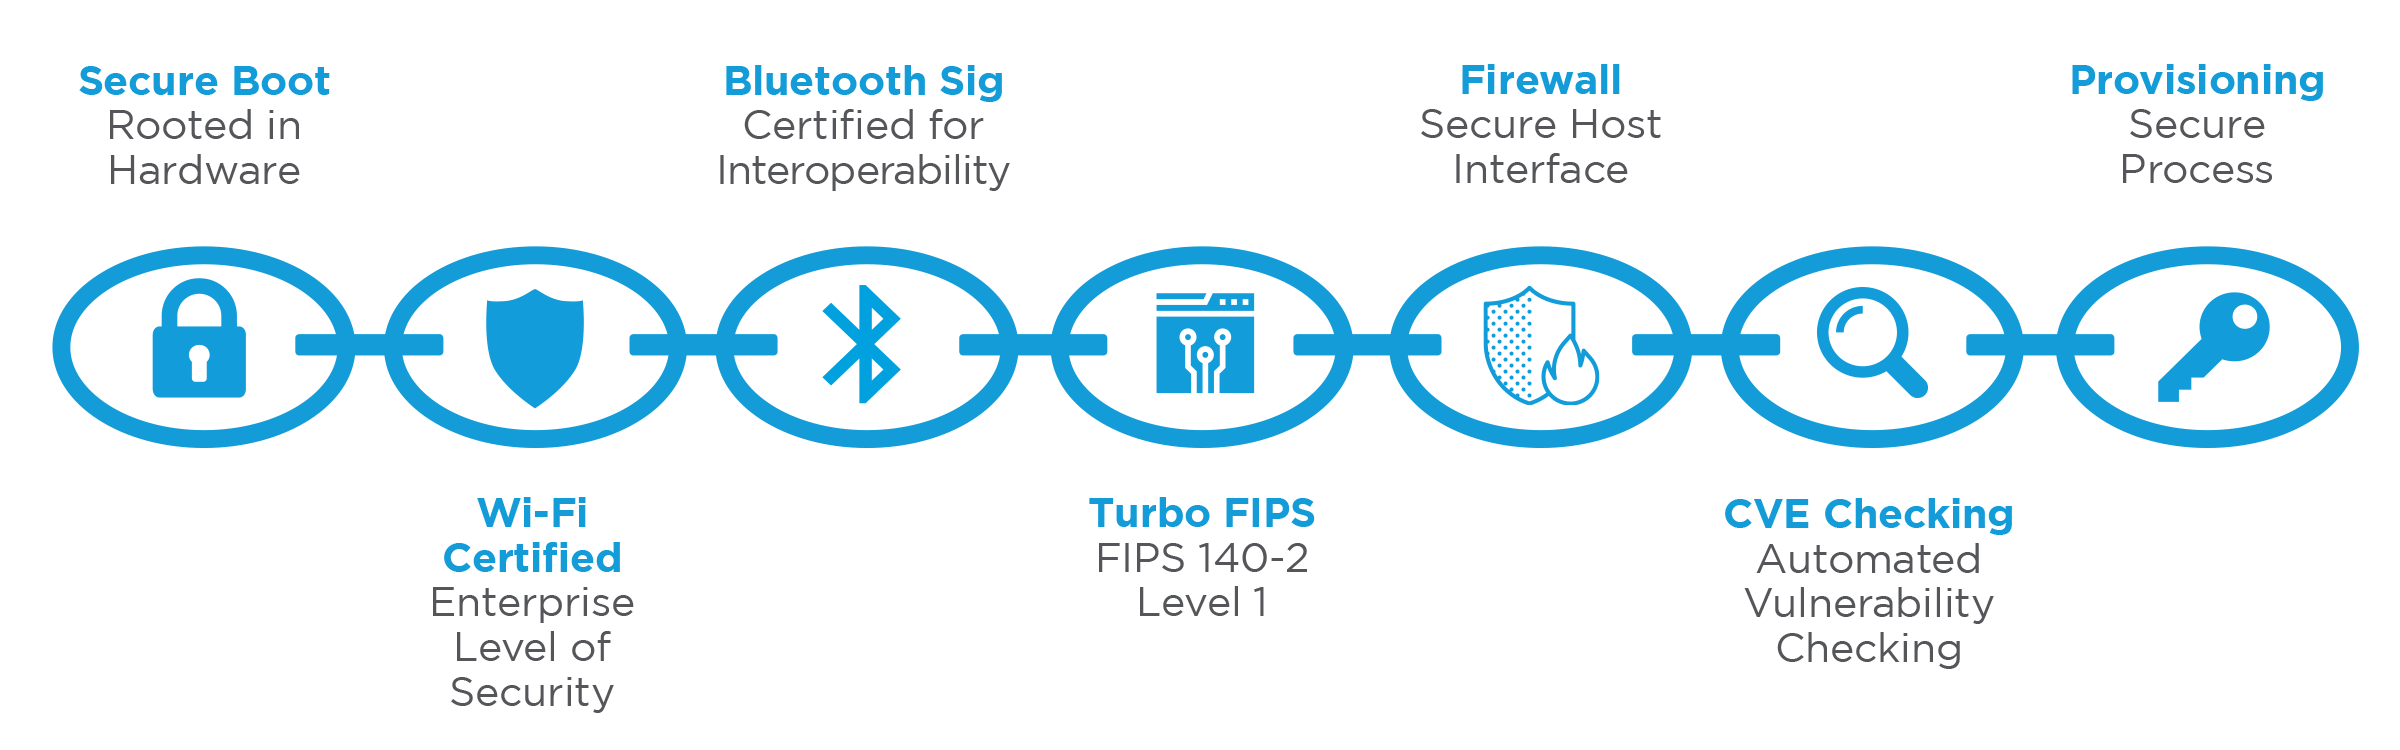 A Closer Look at the Chain of Trust Security Architecture: Provisioning and Secure Boot